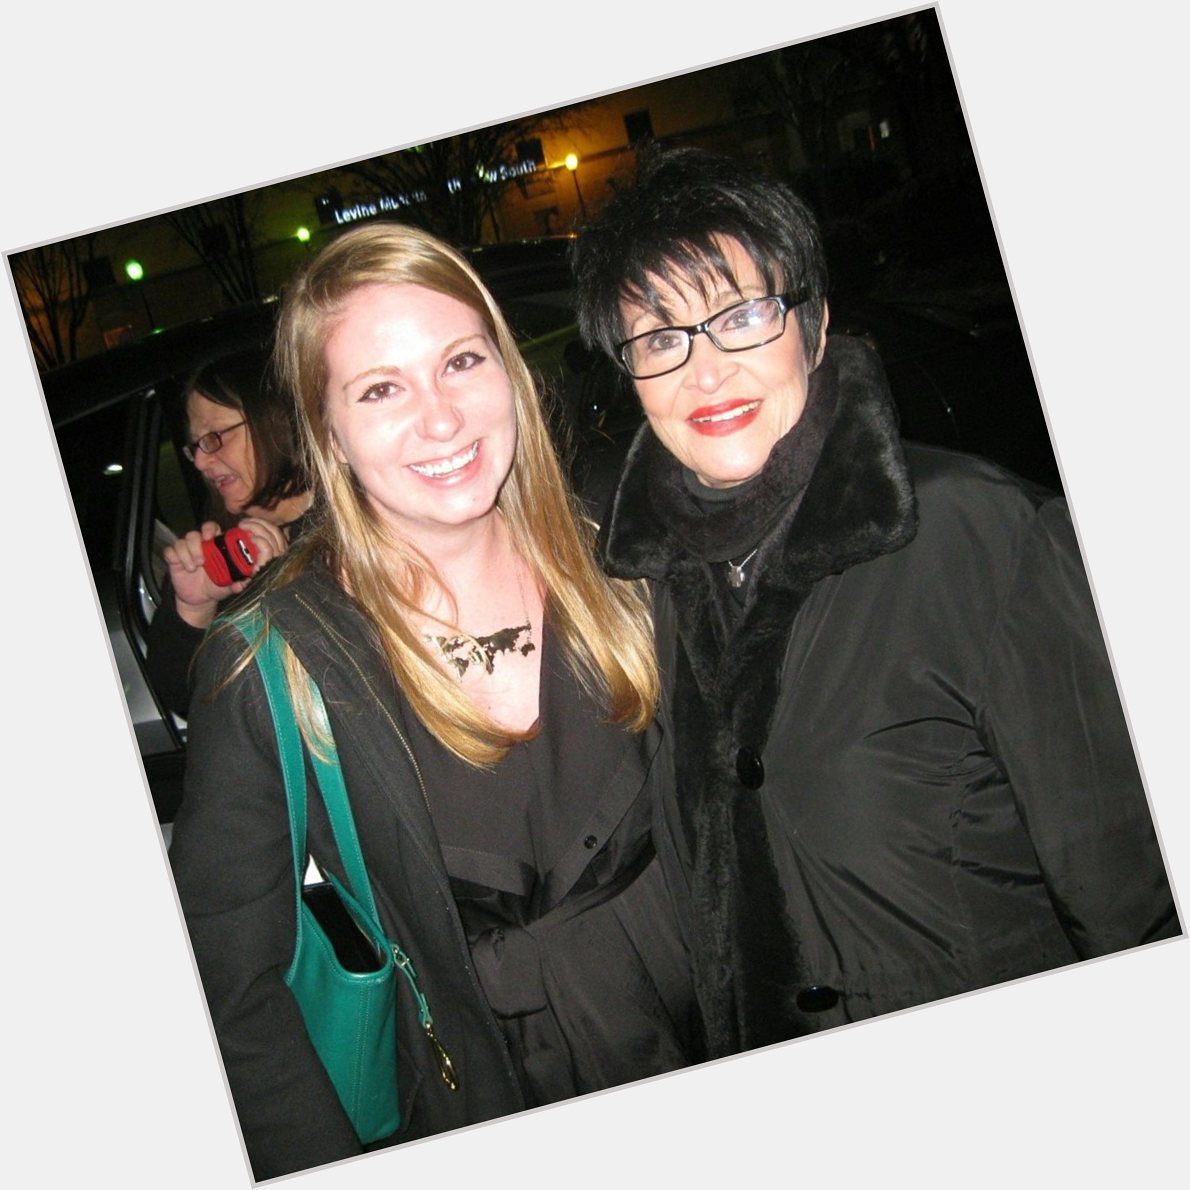 Happy birthday to the amazing Chita Rivera! I met Ms. Rivera after her one woman show in Feb. 2015 in Charlotte 